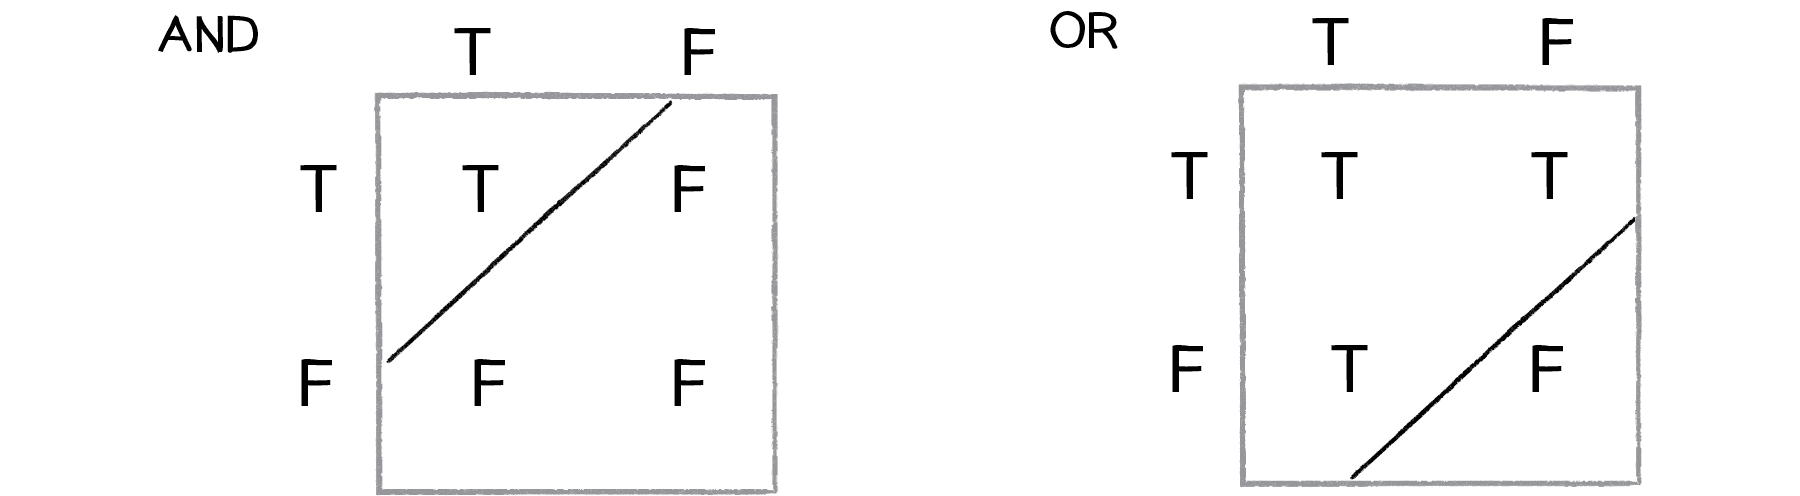 Figure 10.11: Truth tables for the \text{AND} and \text{OR} logical operators. The true and false outputs can be separated by a line.